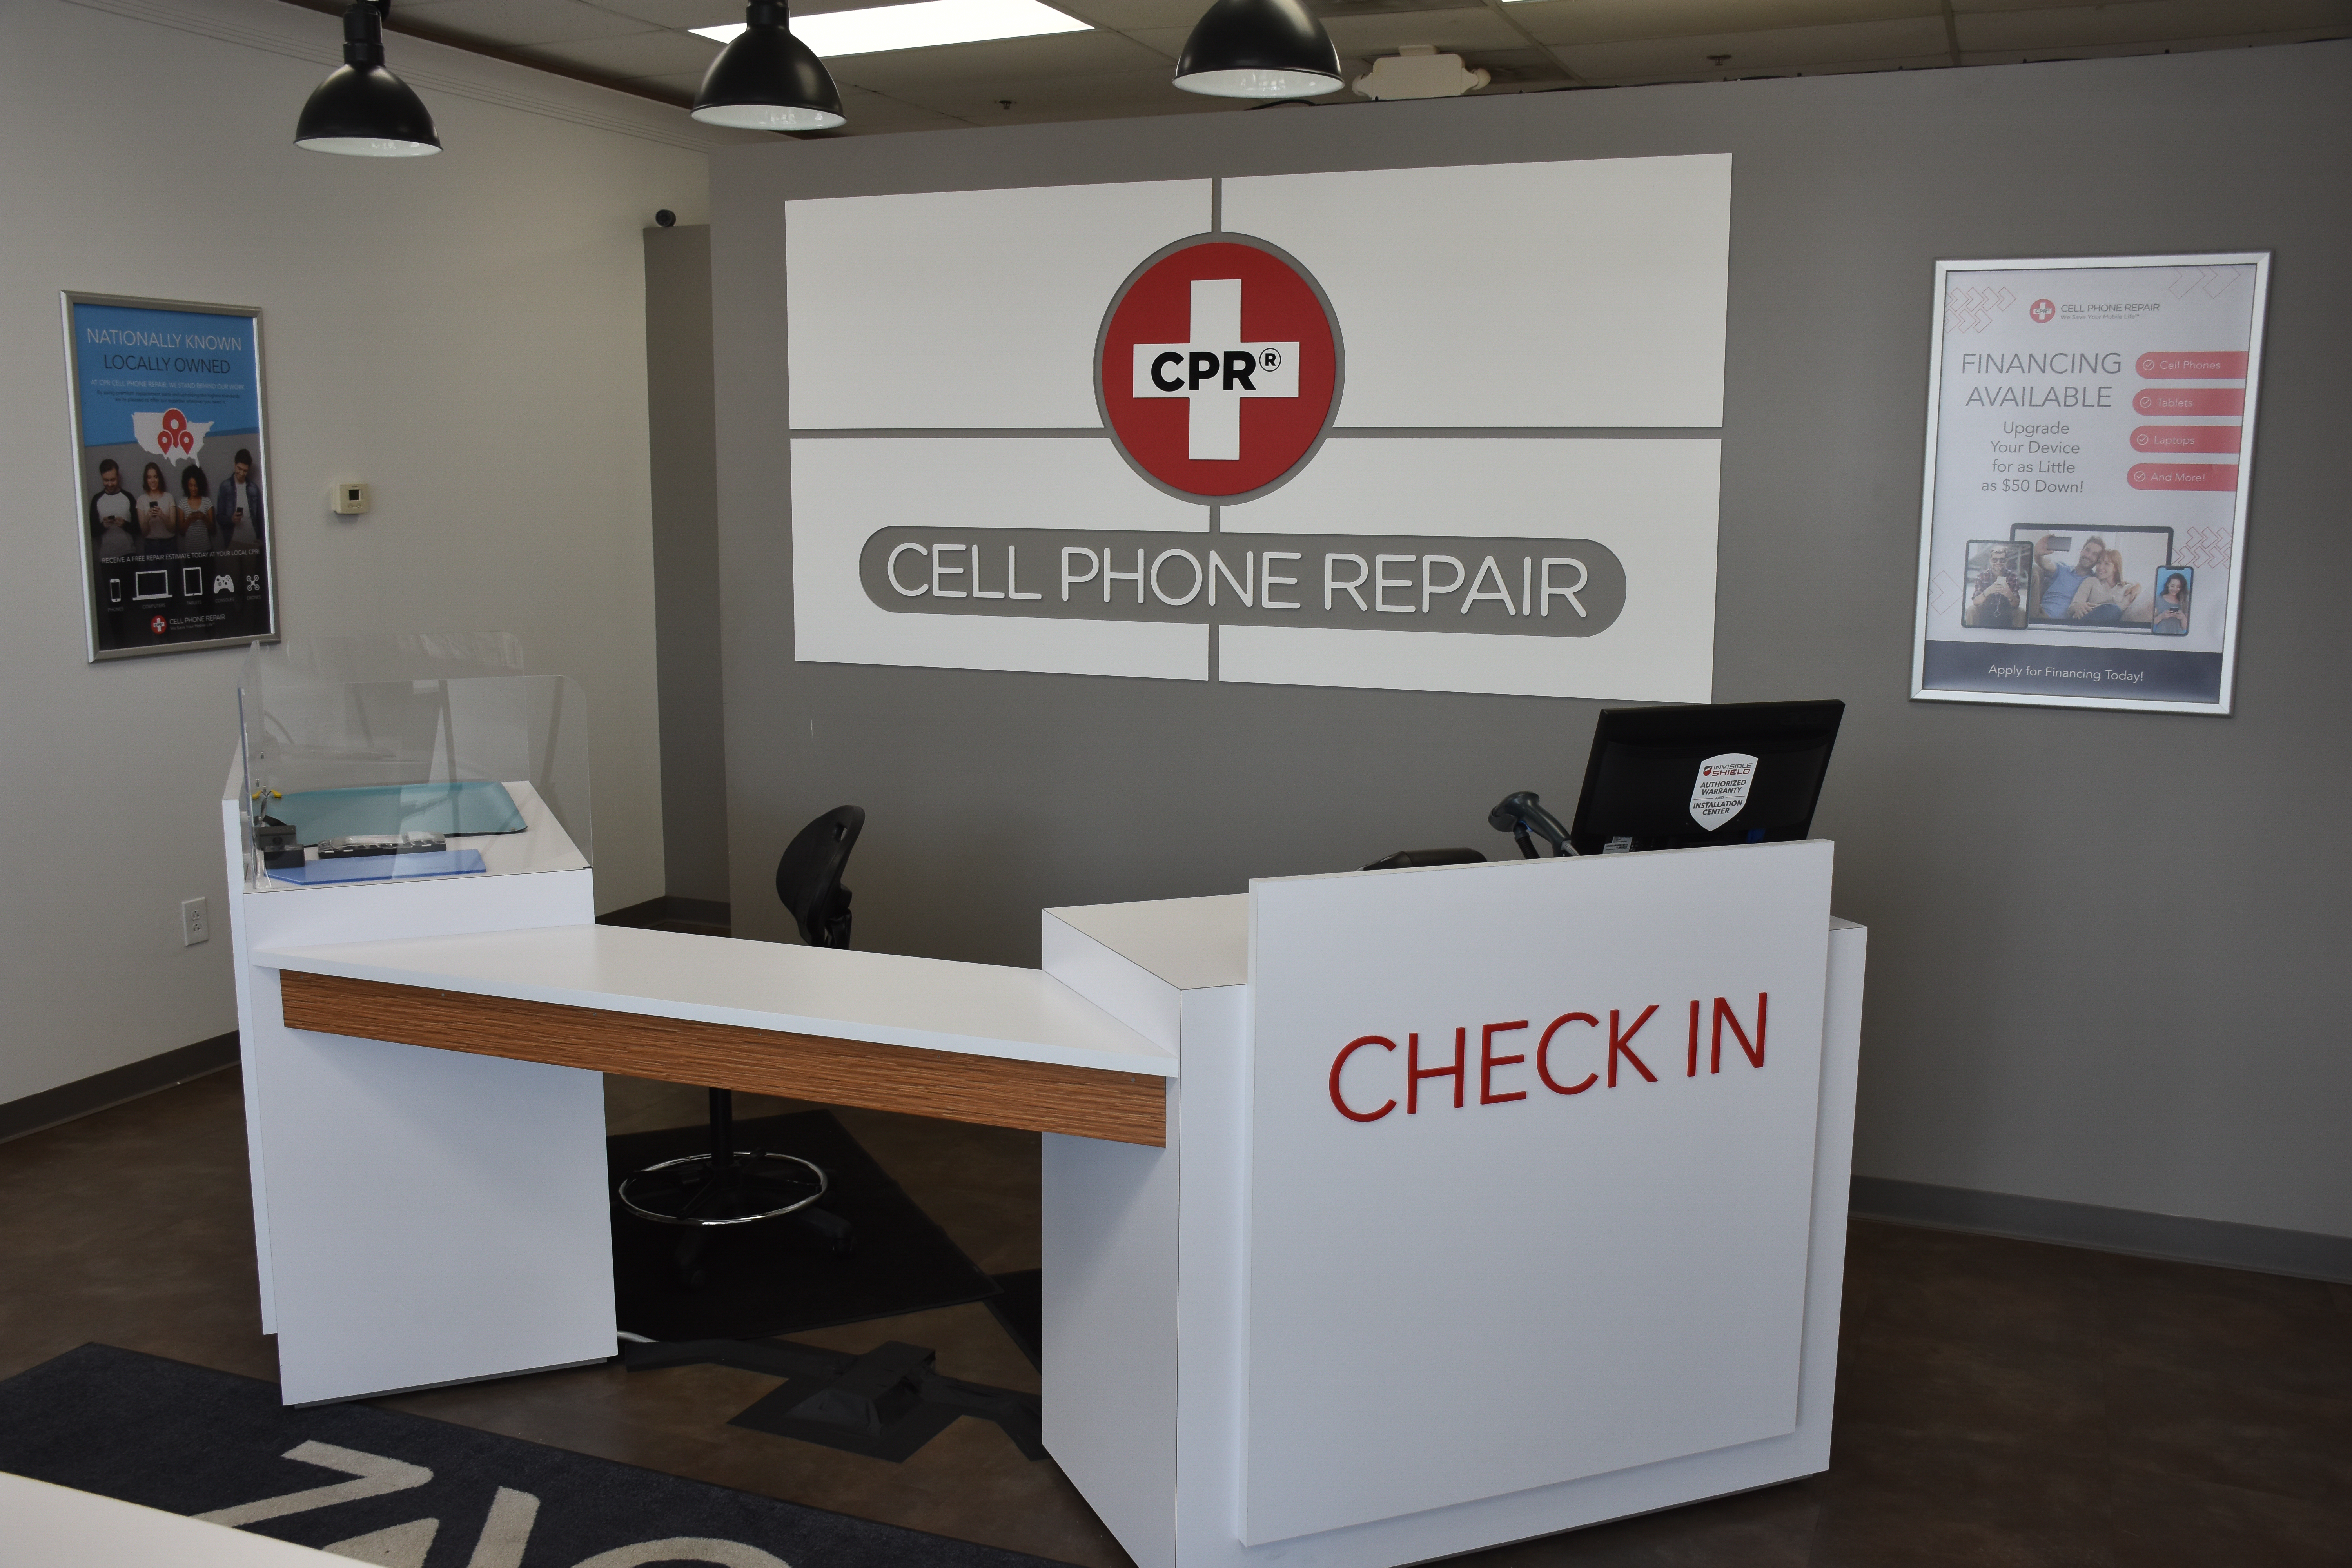 CPR Cell Phone Repair, Tuesday, June 22, 2021, Press release picture